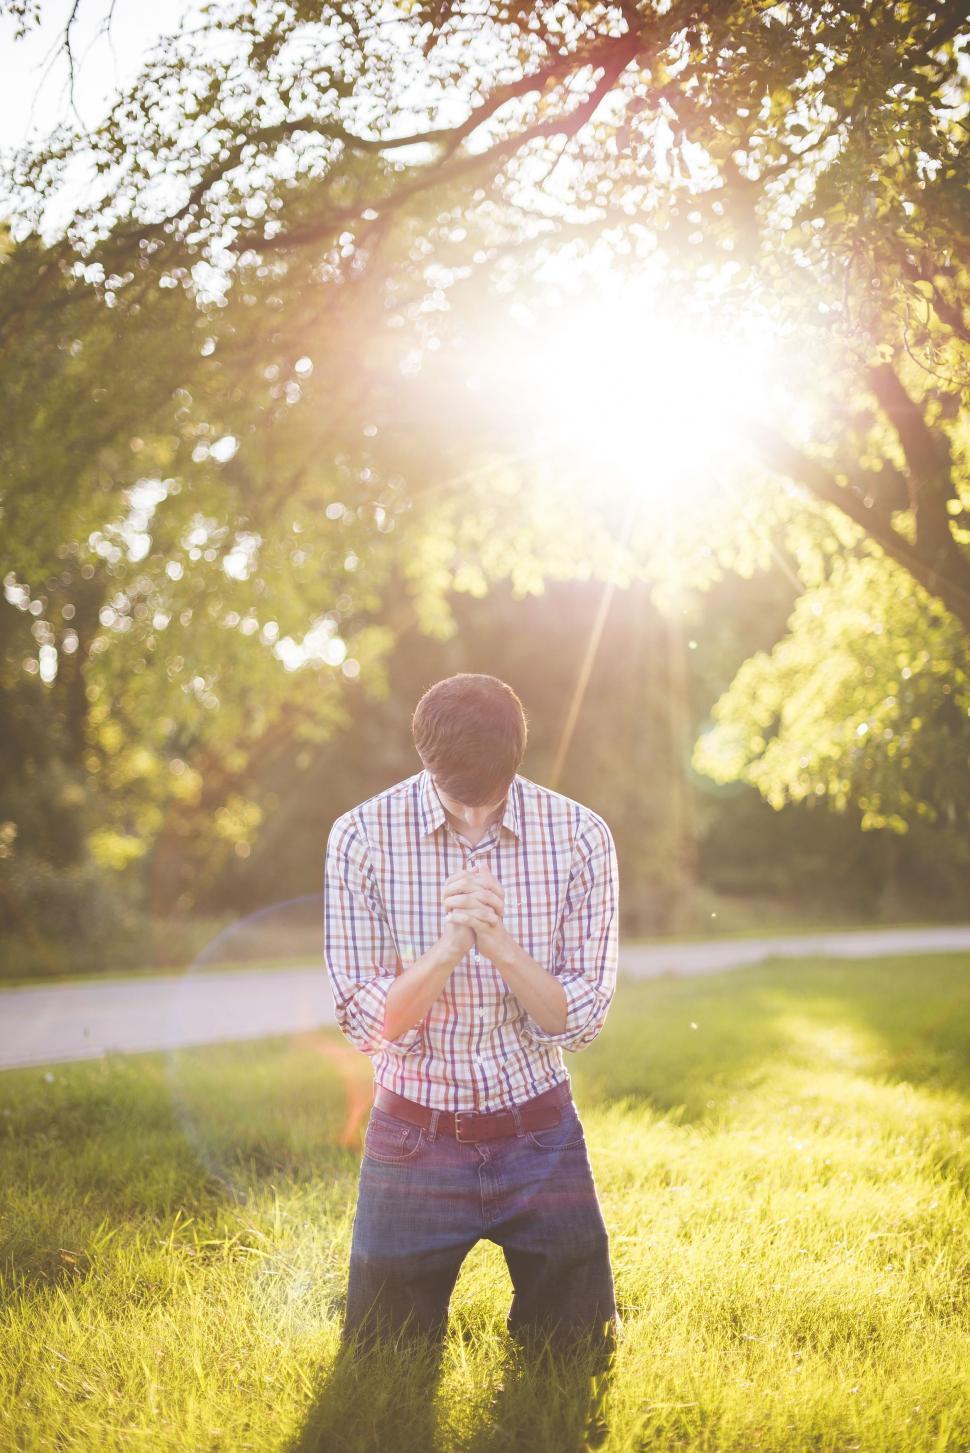 Free Image of Praying on Green Grass with Sunlight  